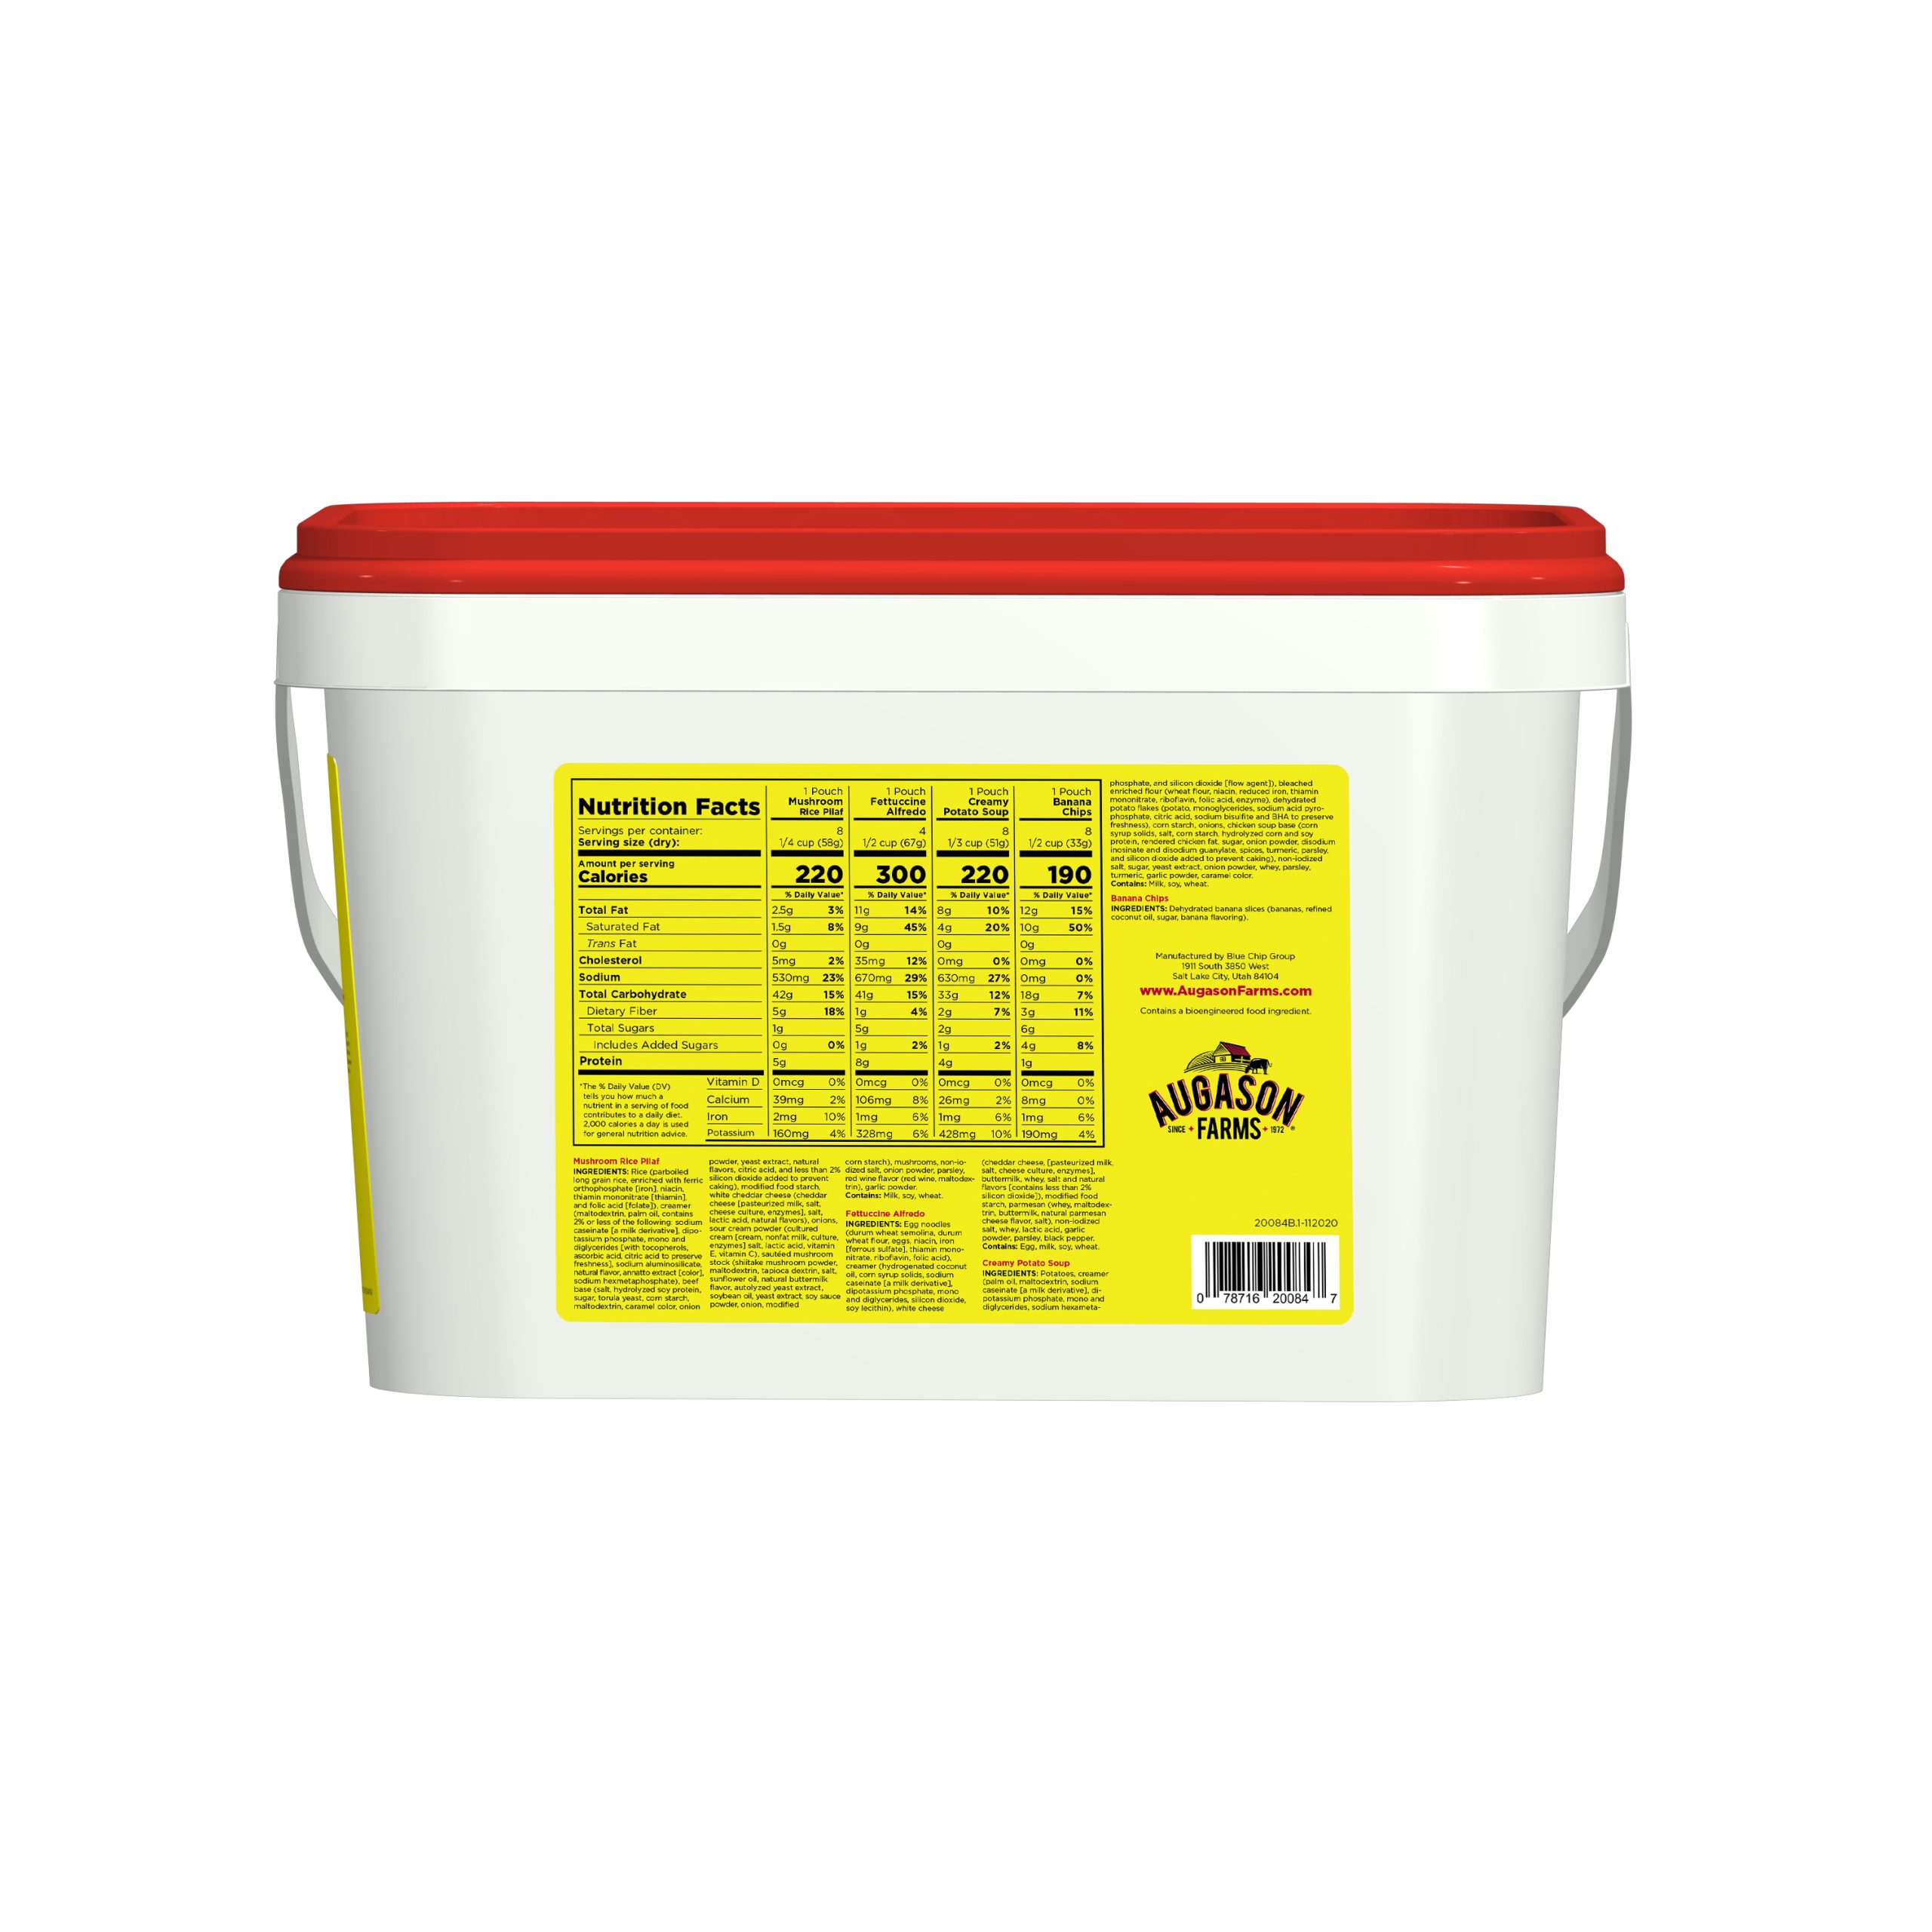 A white Augason Farms 5-Day 1-Person Survival Pail - 58 Servings - (SHIPS IN 1-2 WEEKS) with a red lid.